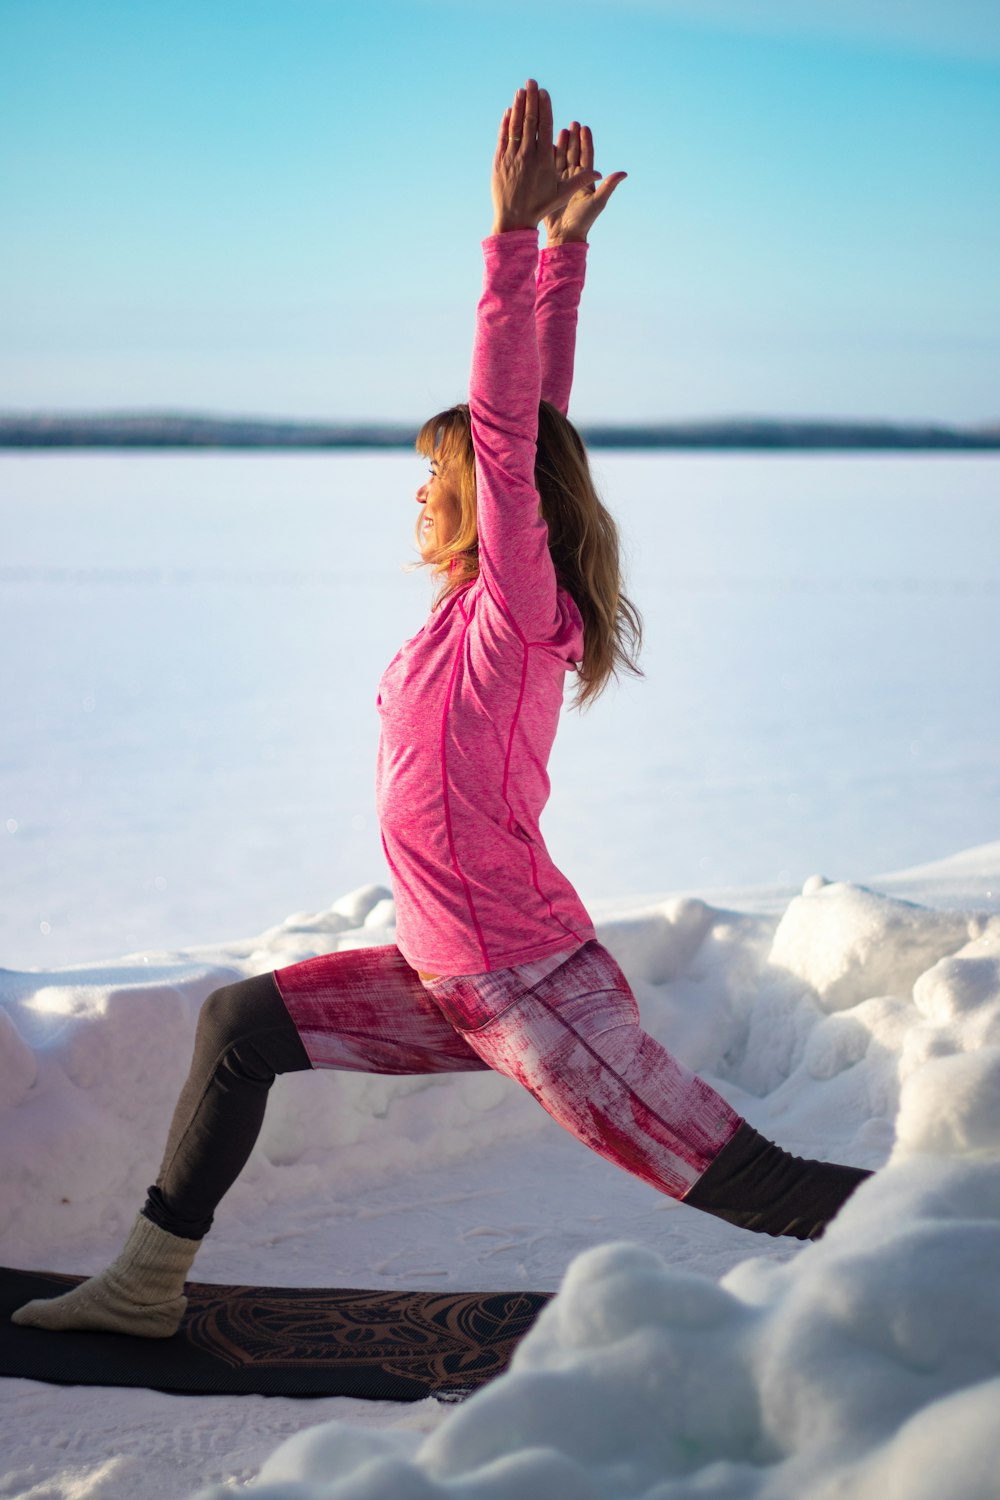 woman in pink jacket and black pants jumping on snow covered ground during daytime